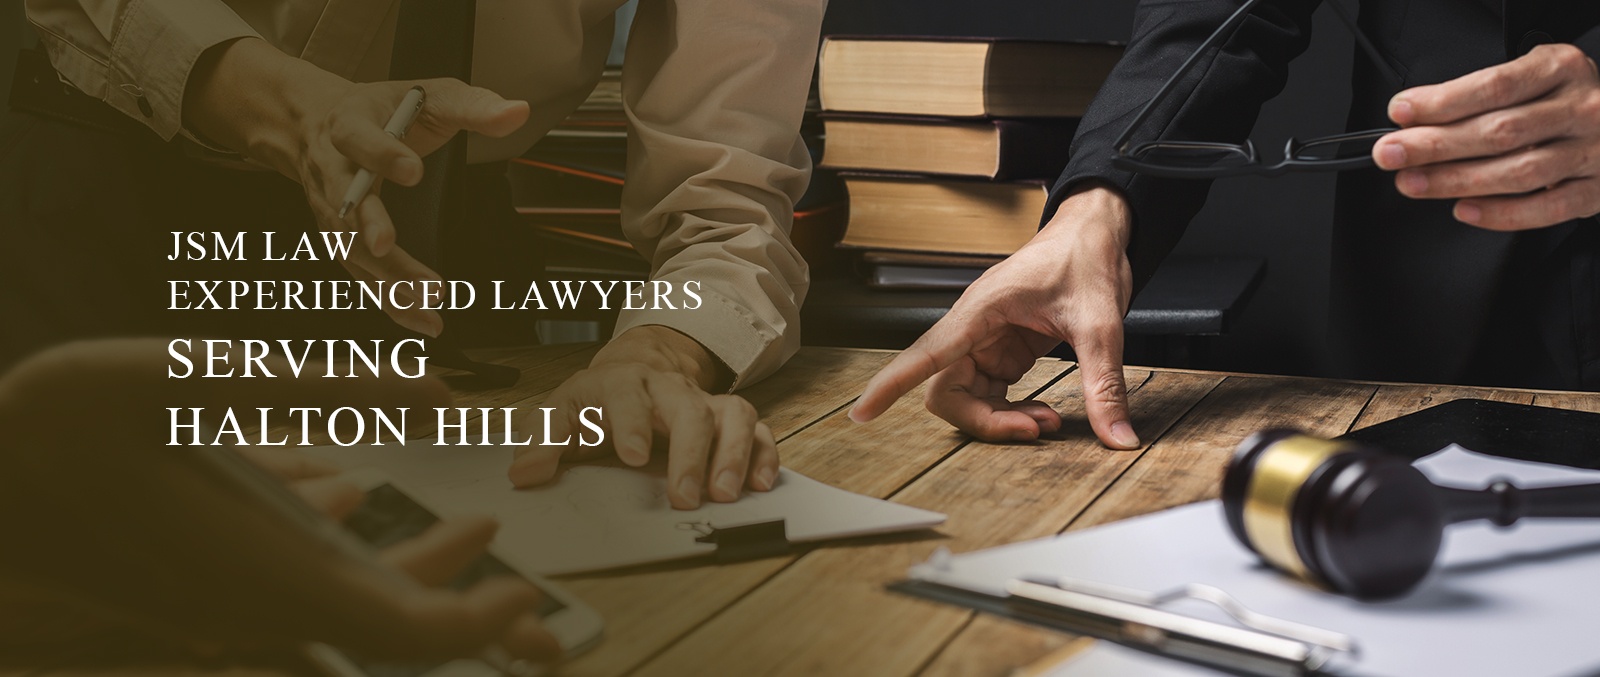 CORPORATE, CRIMINAL AND PERSONAL INJURY LAWYERS HALTON HILLS ON